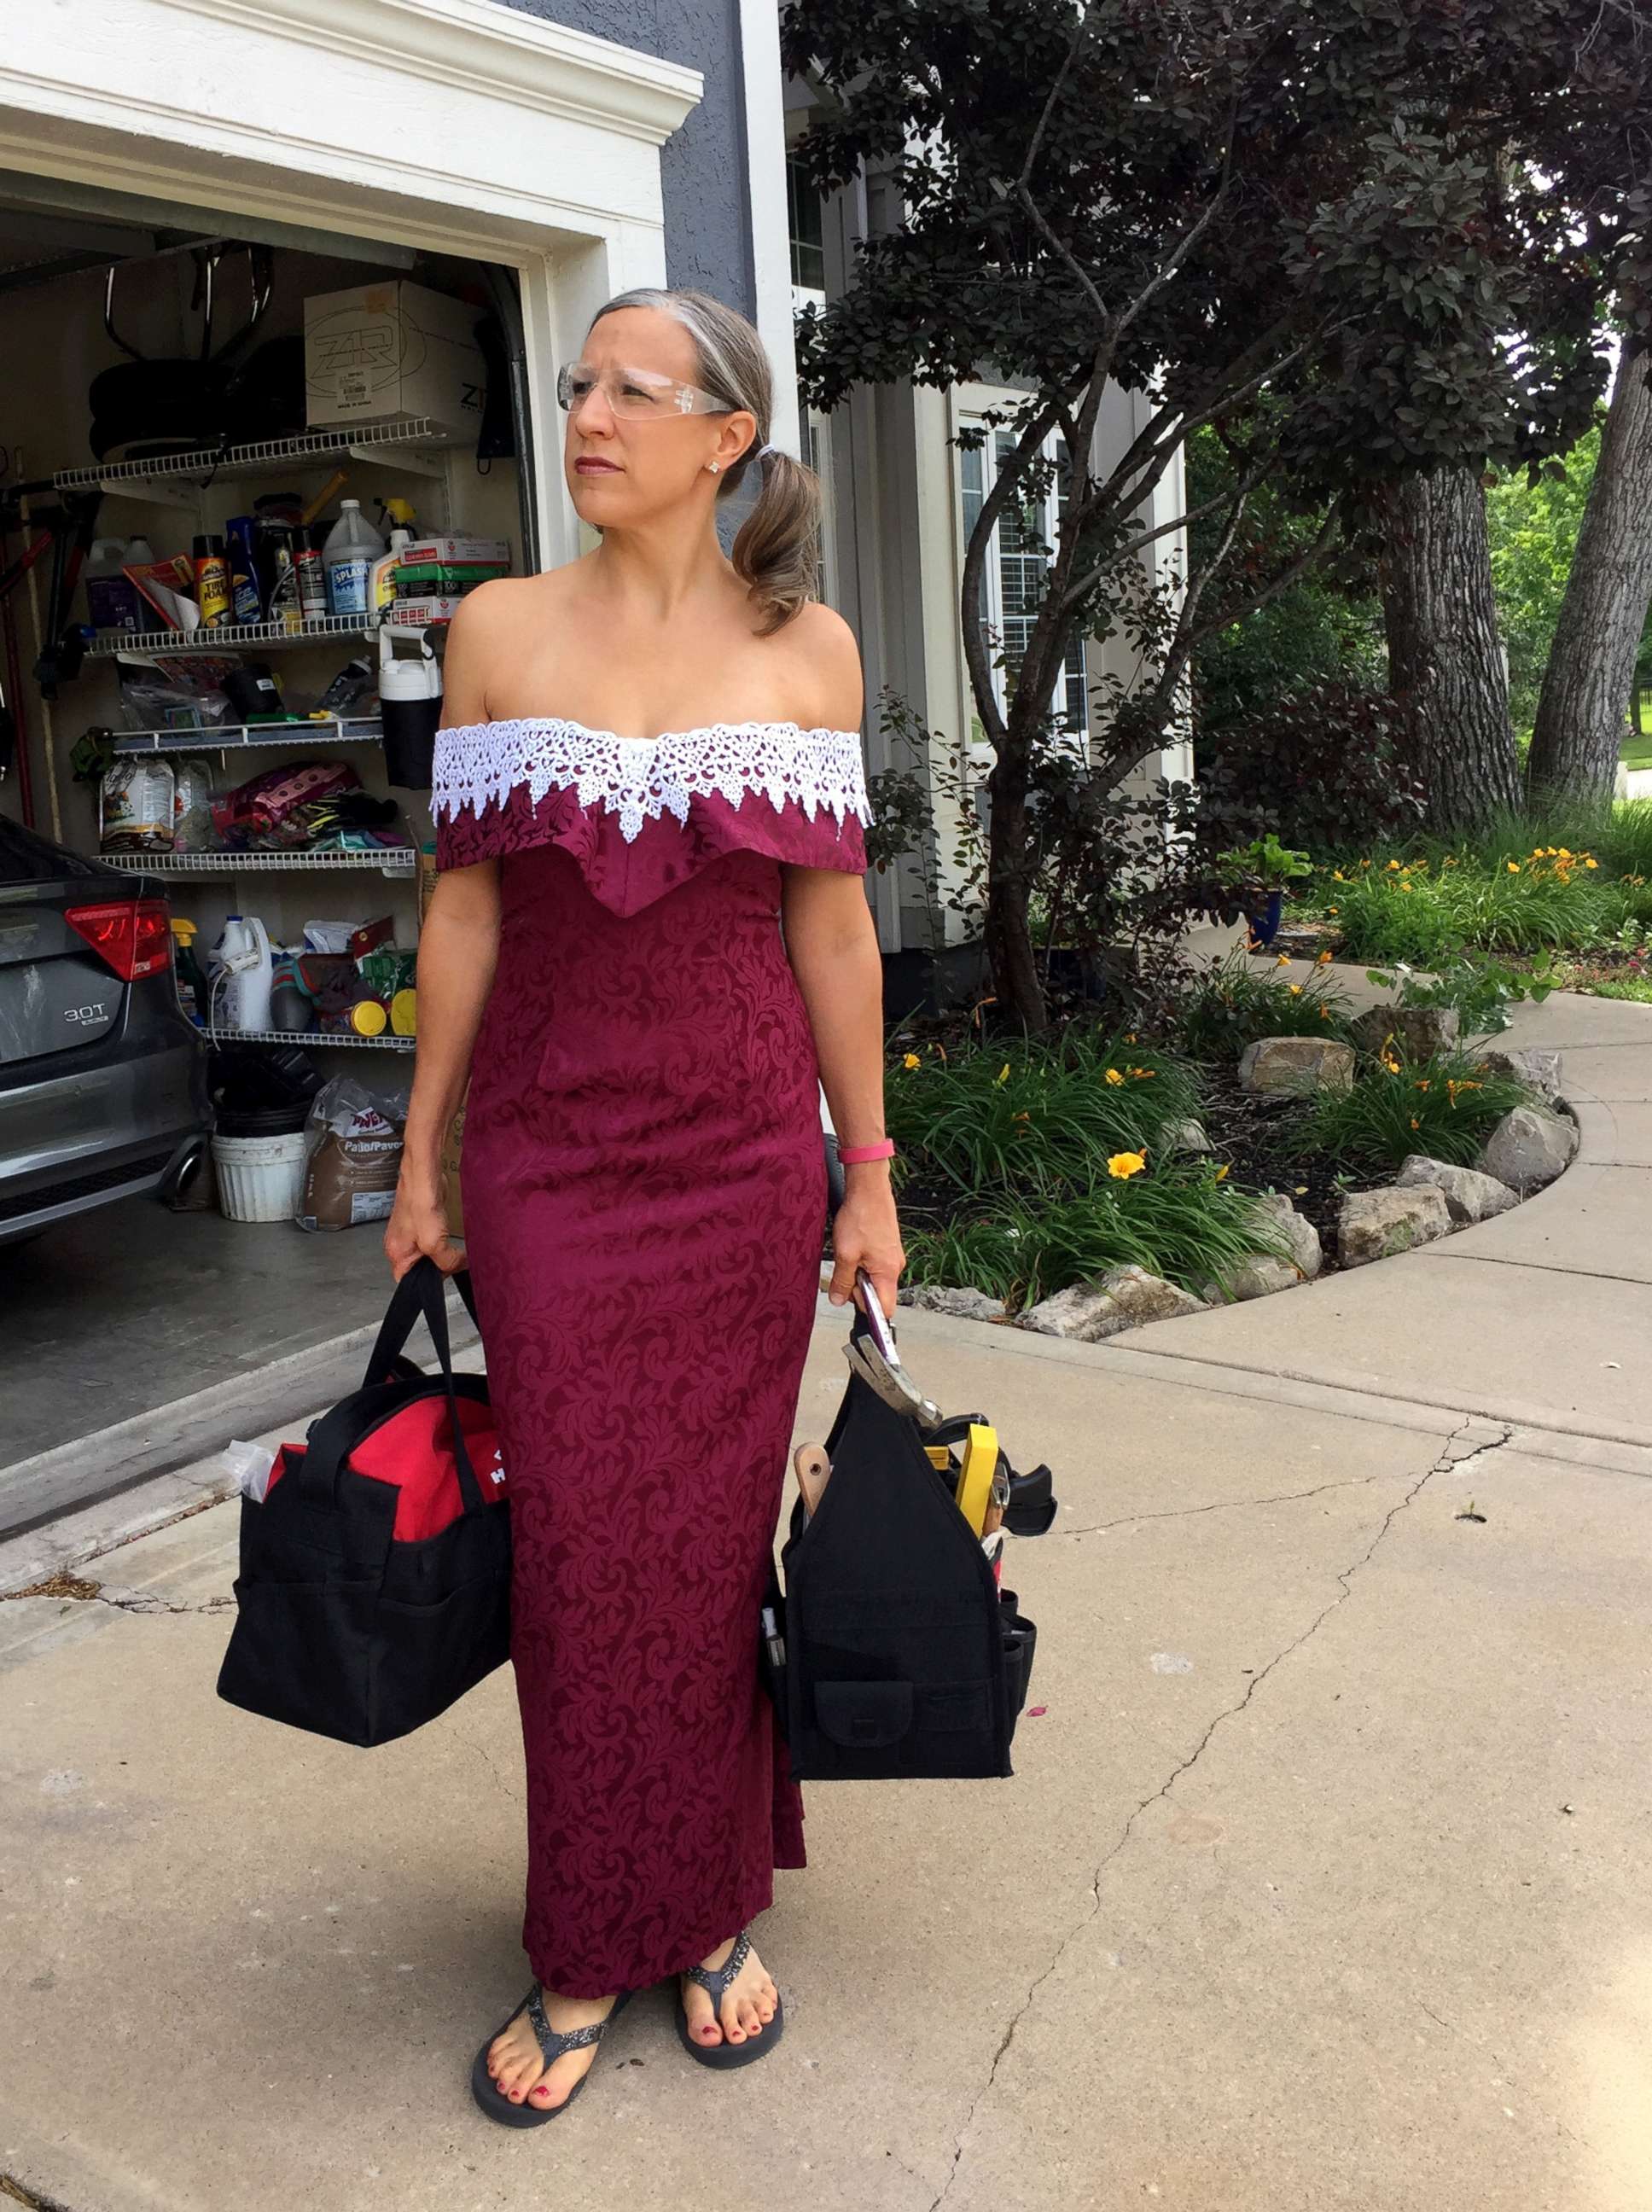 PHOTO: Heidi Mann's Facebook post about how she wears a decades-old bridesmaid dress "all the time" has gone viral.